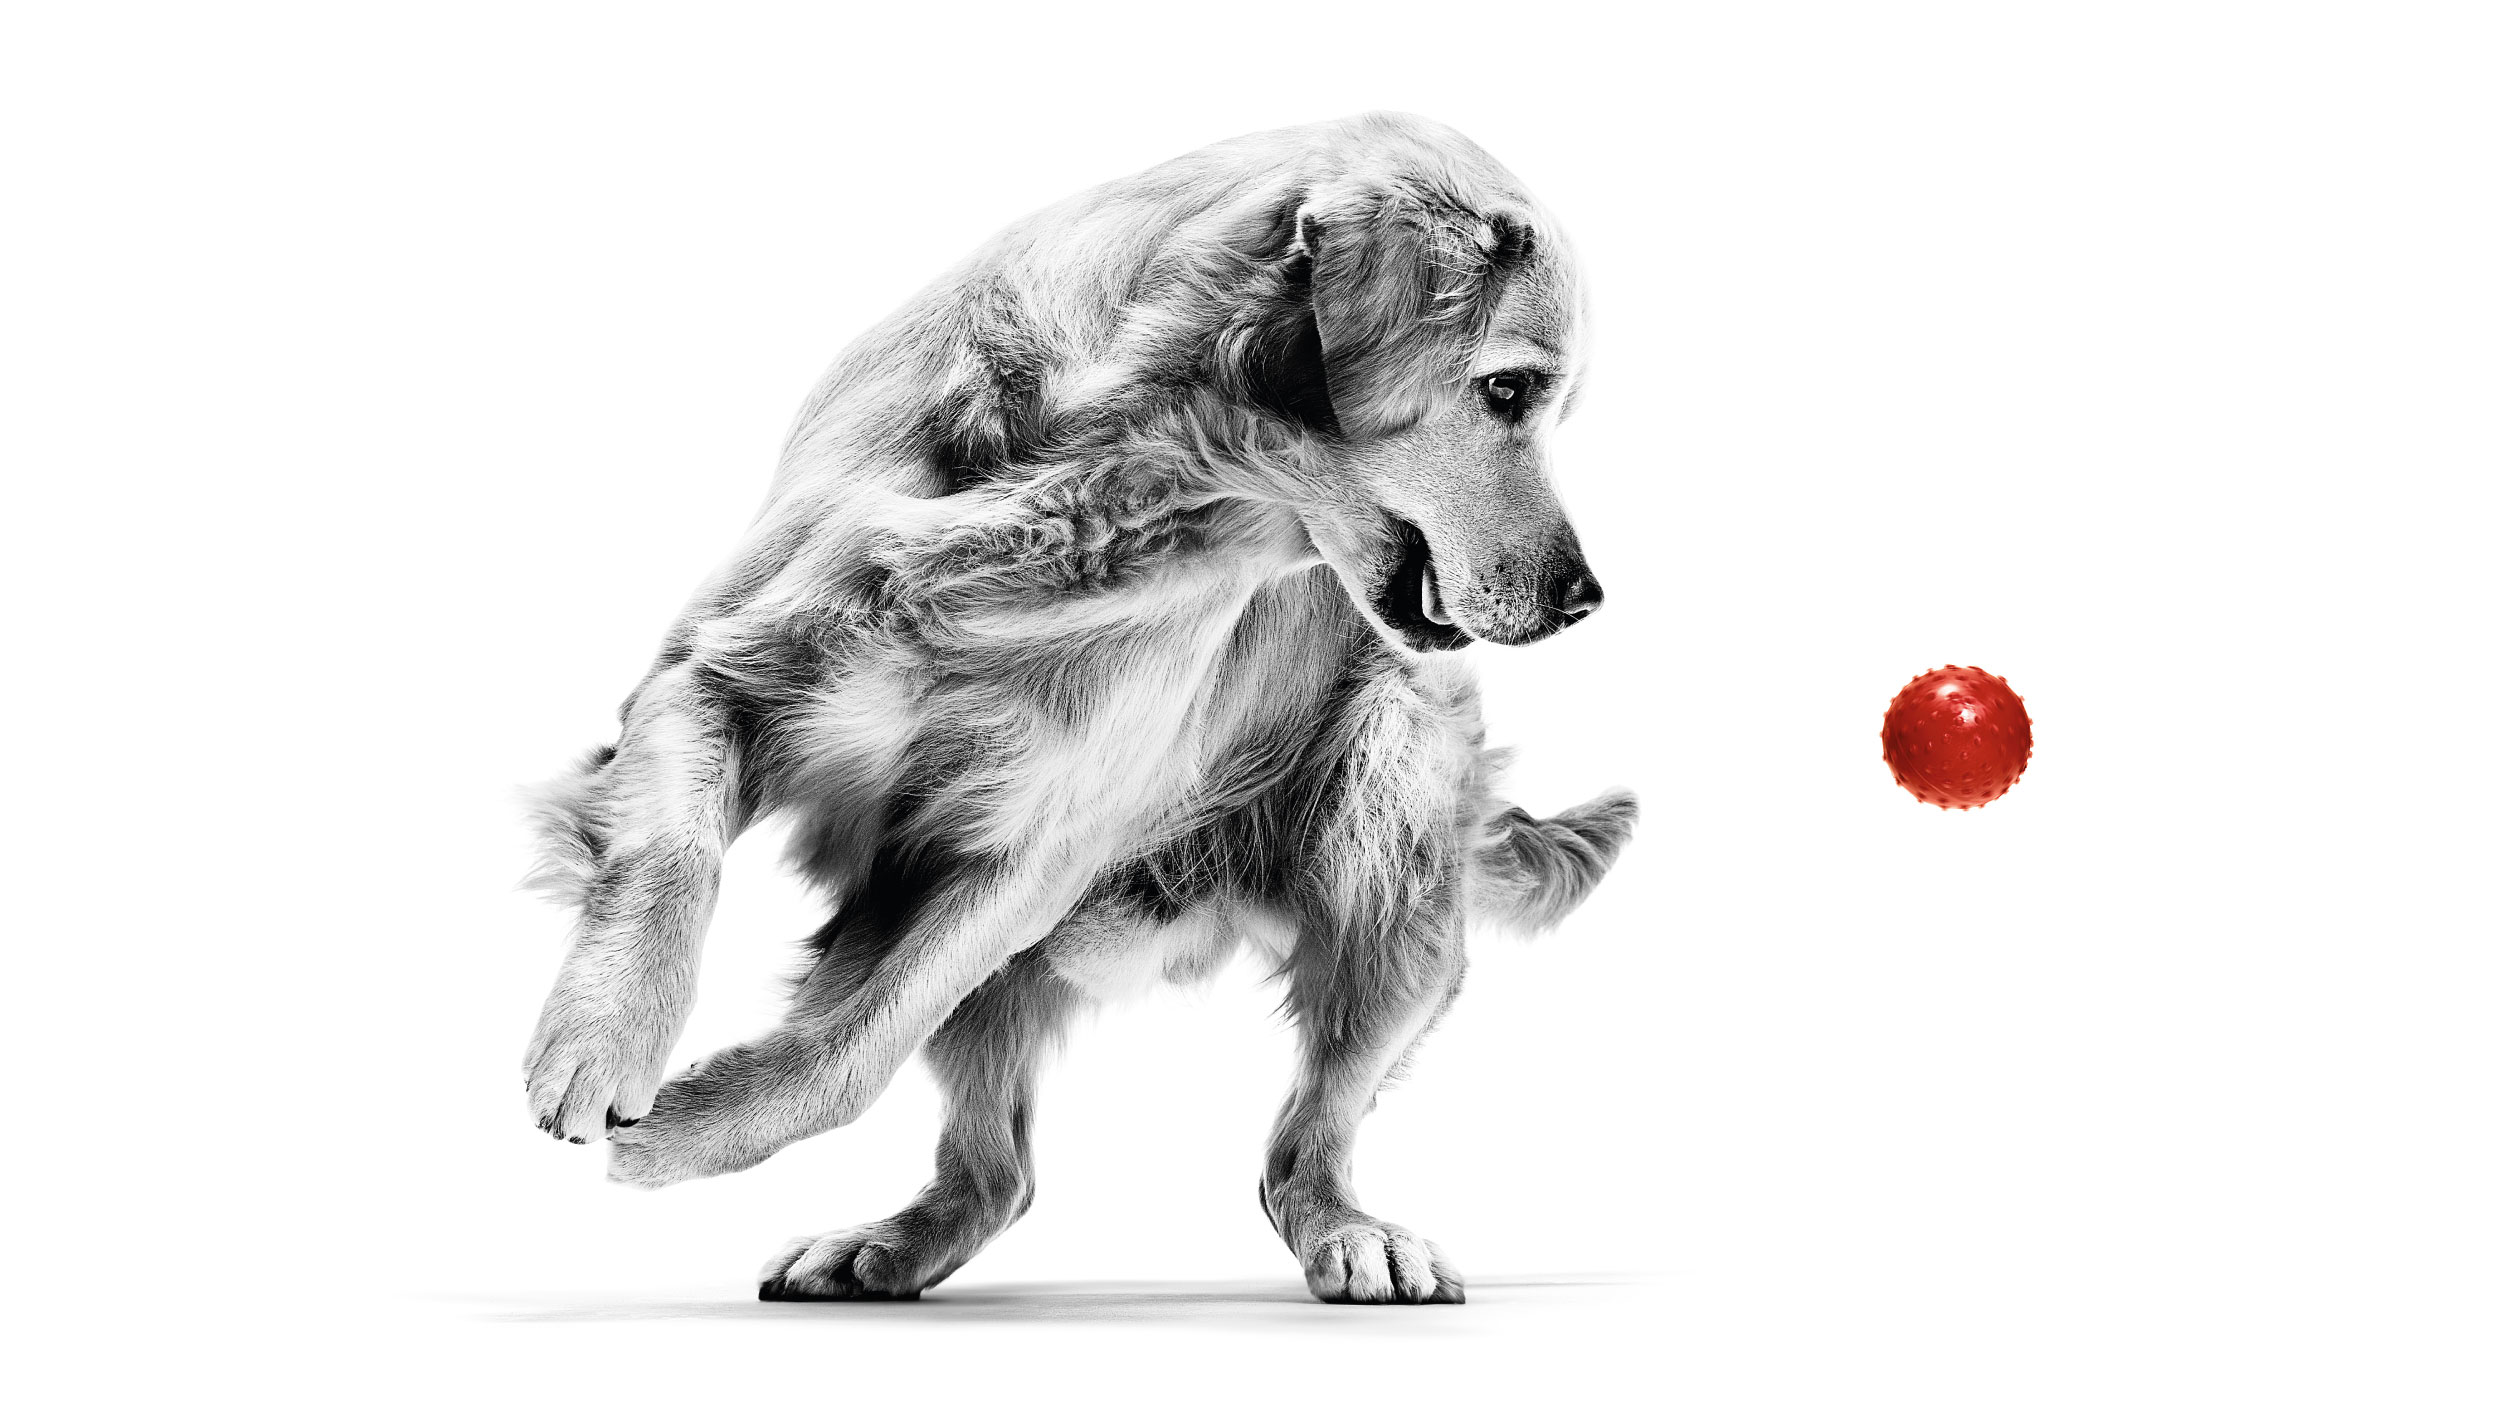 Black and white Golden Retriever playing with red ball